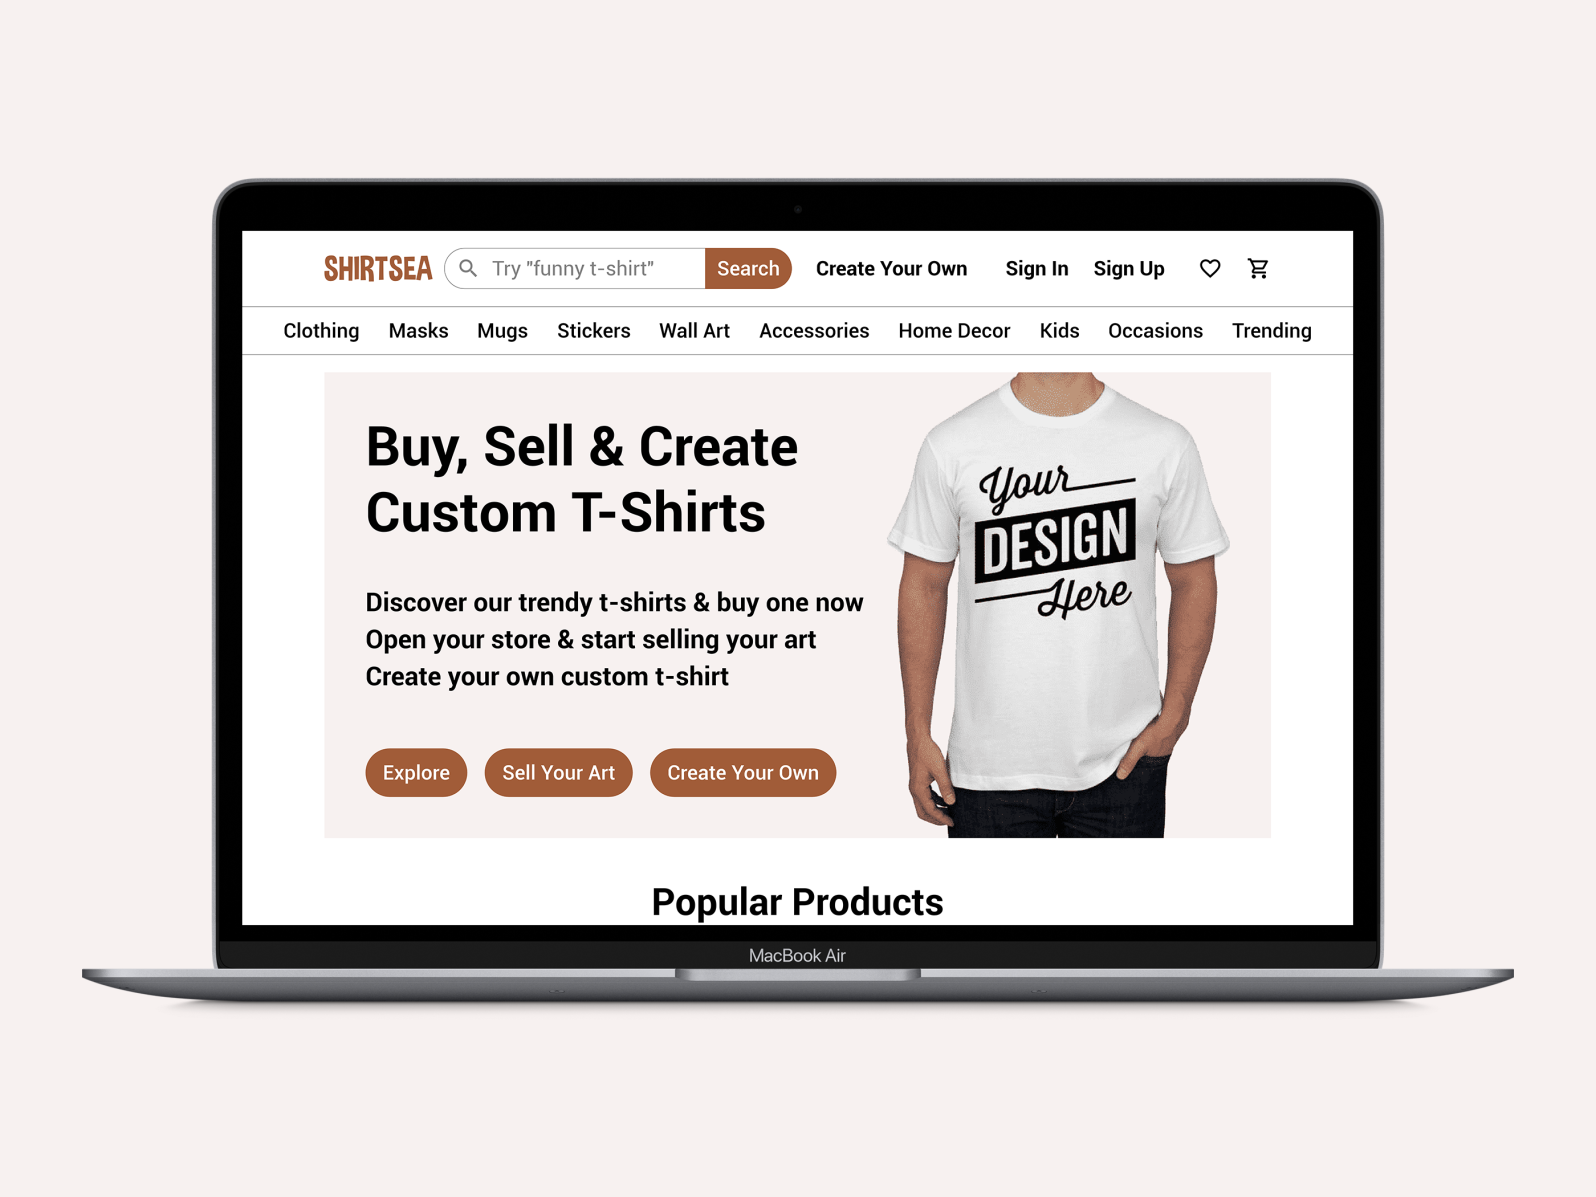 straf forgænger dash ShirtSea - Custom T-Shirt Printing Website Design And Case Study by Ismail  Houman on Dribbble